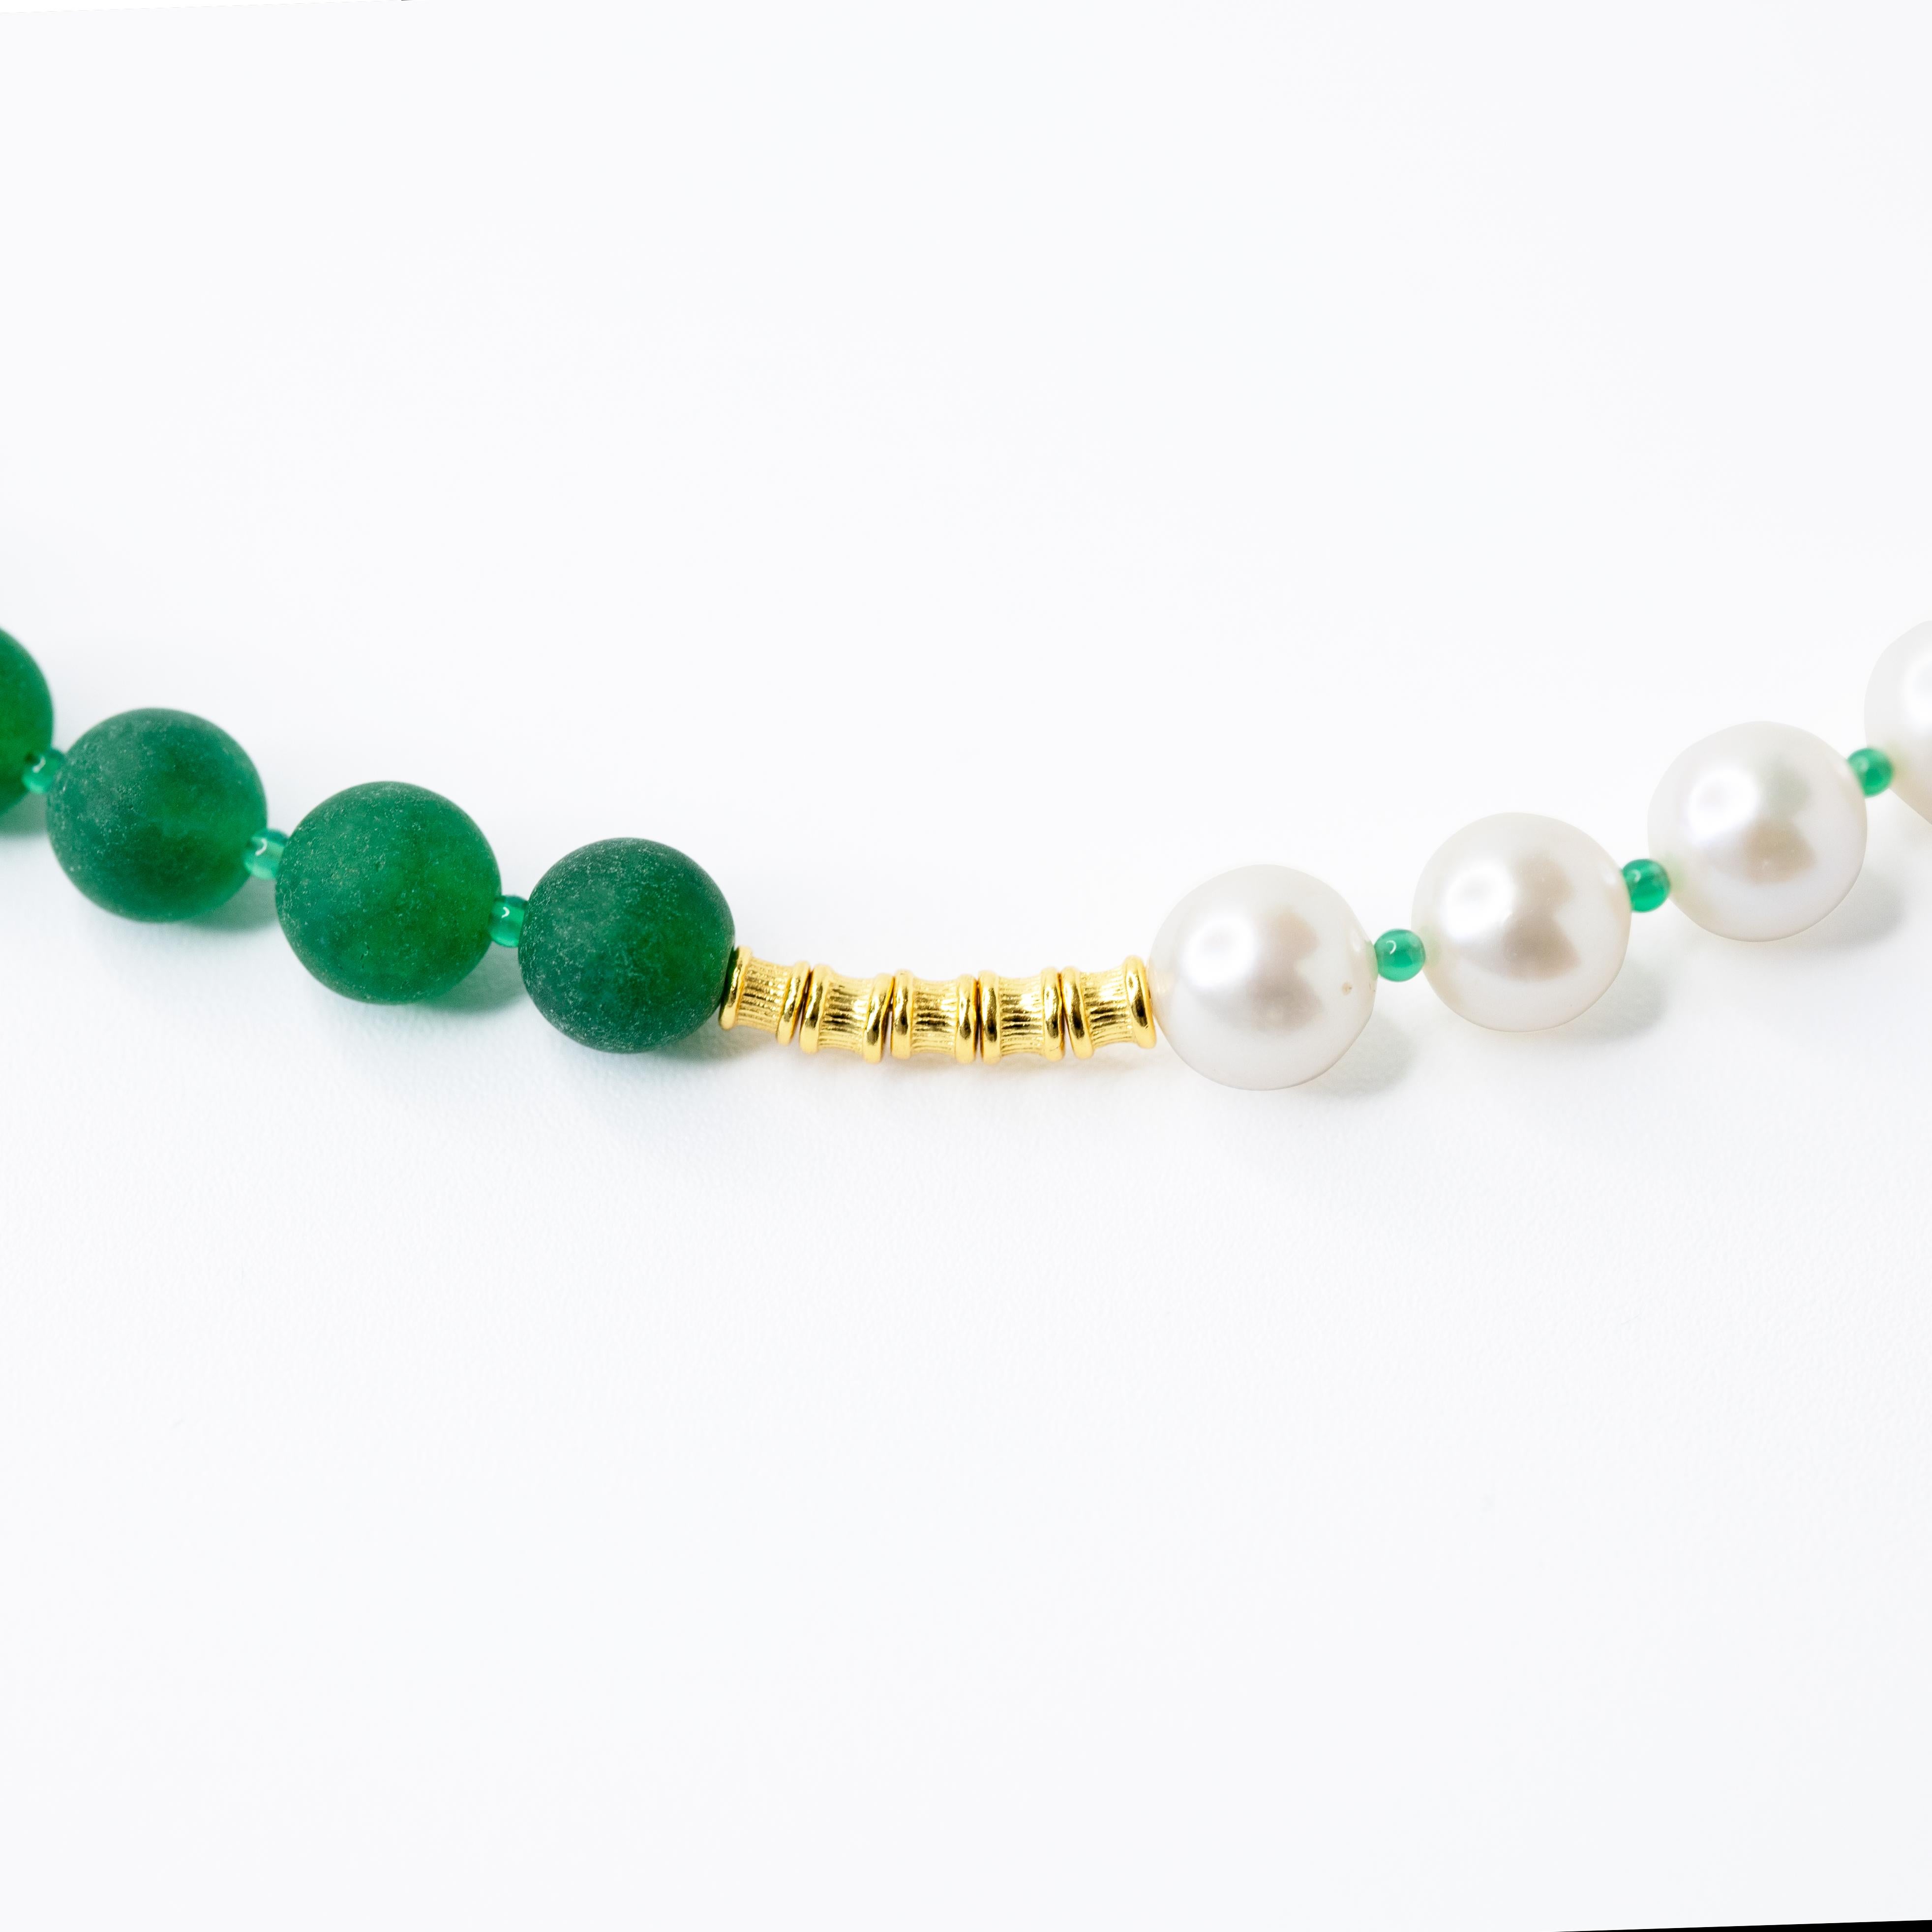 This necklace is crafted from Natural Fresh Water Peals,  Chalcedony Beads and 22K gold plated sterling silver Beads, inspired by oil painting 